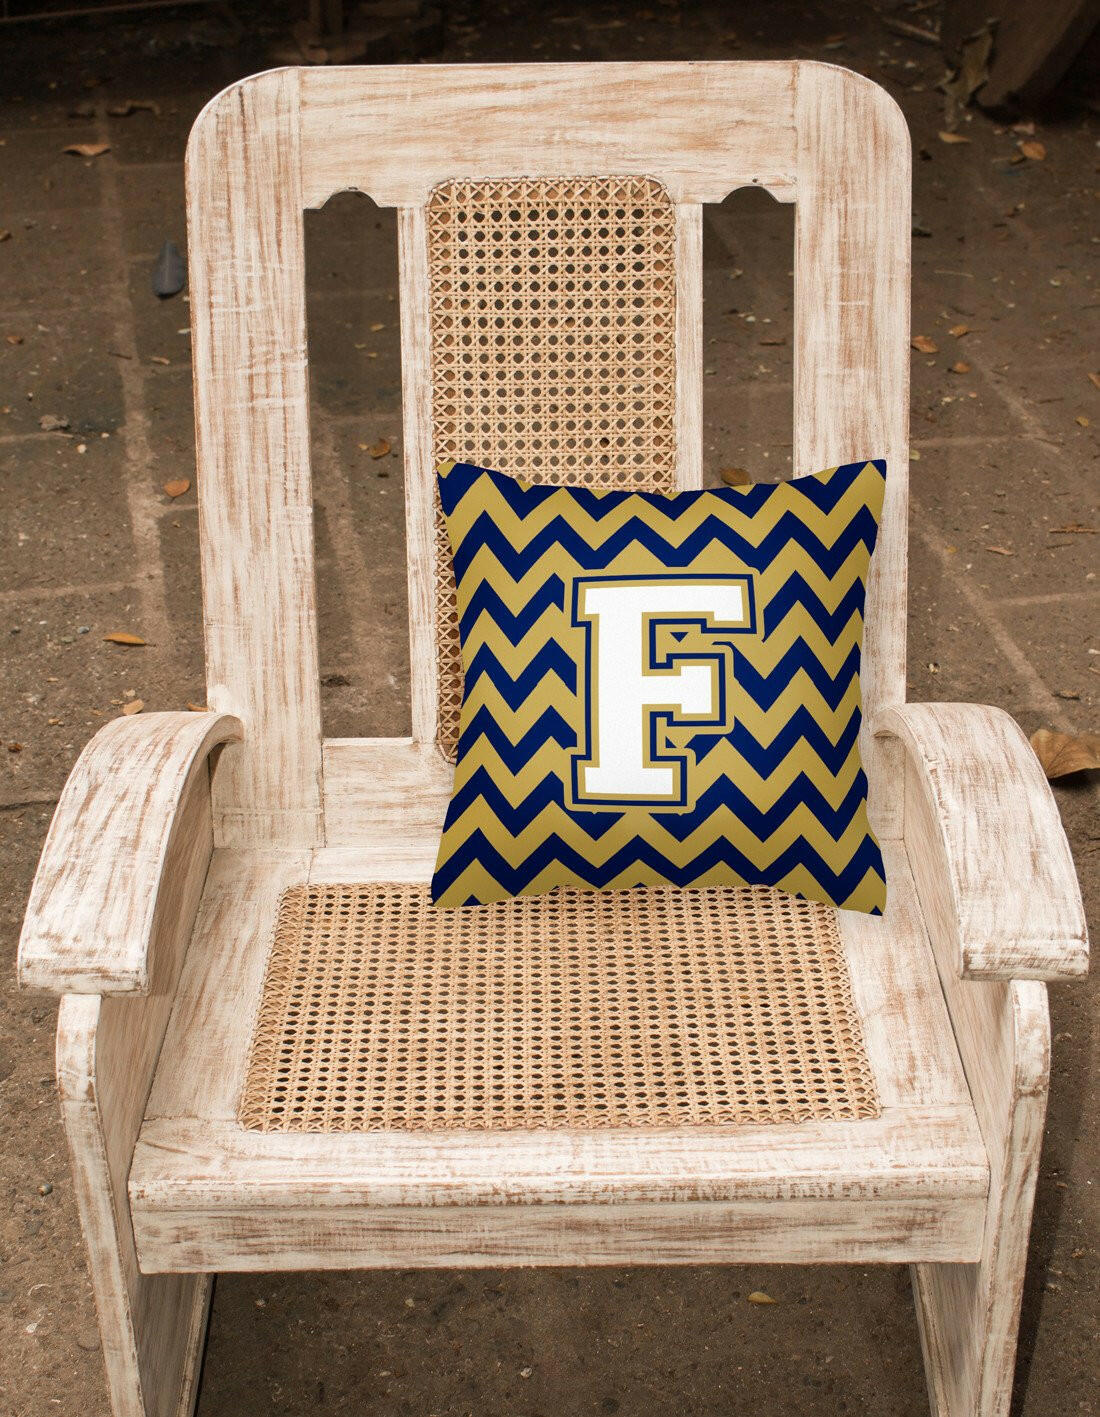 Letter F Chevron Navy Blue and Gold Fabric Decorative Pillow CJ1057-FPW1414 by Caroline's Treasures